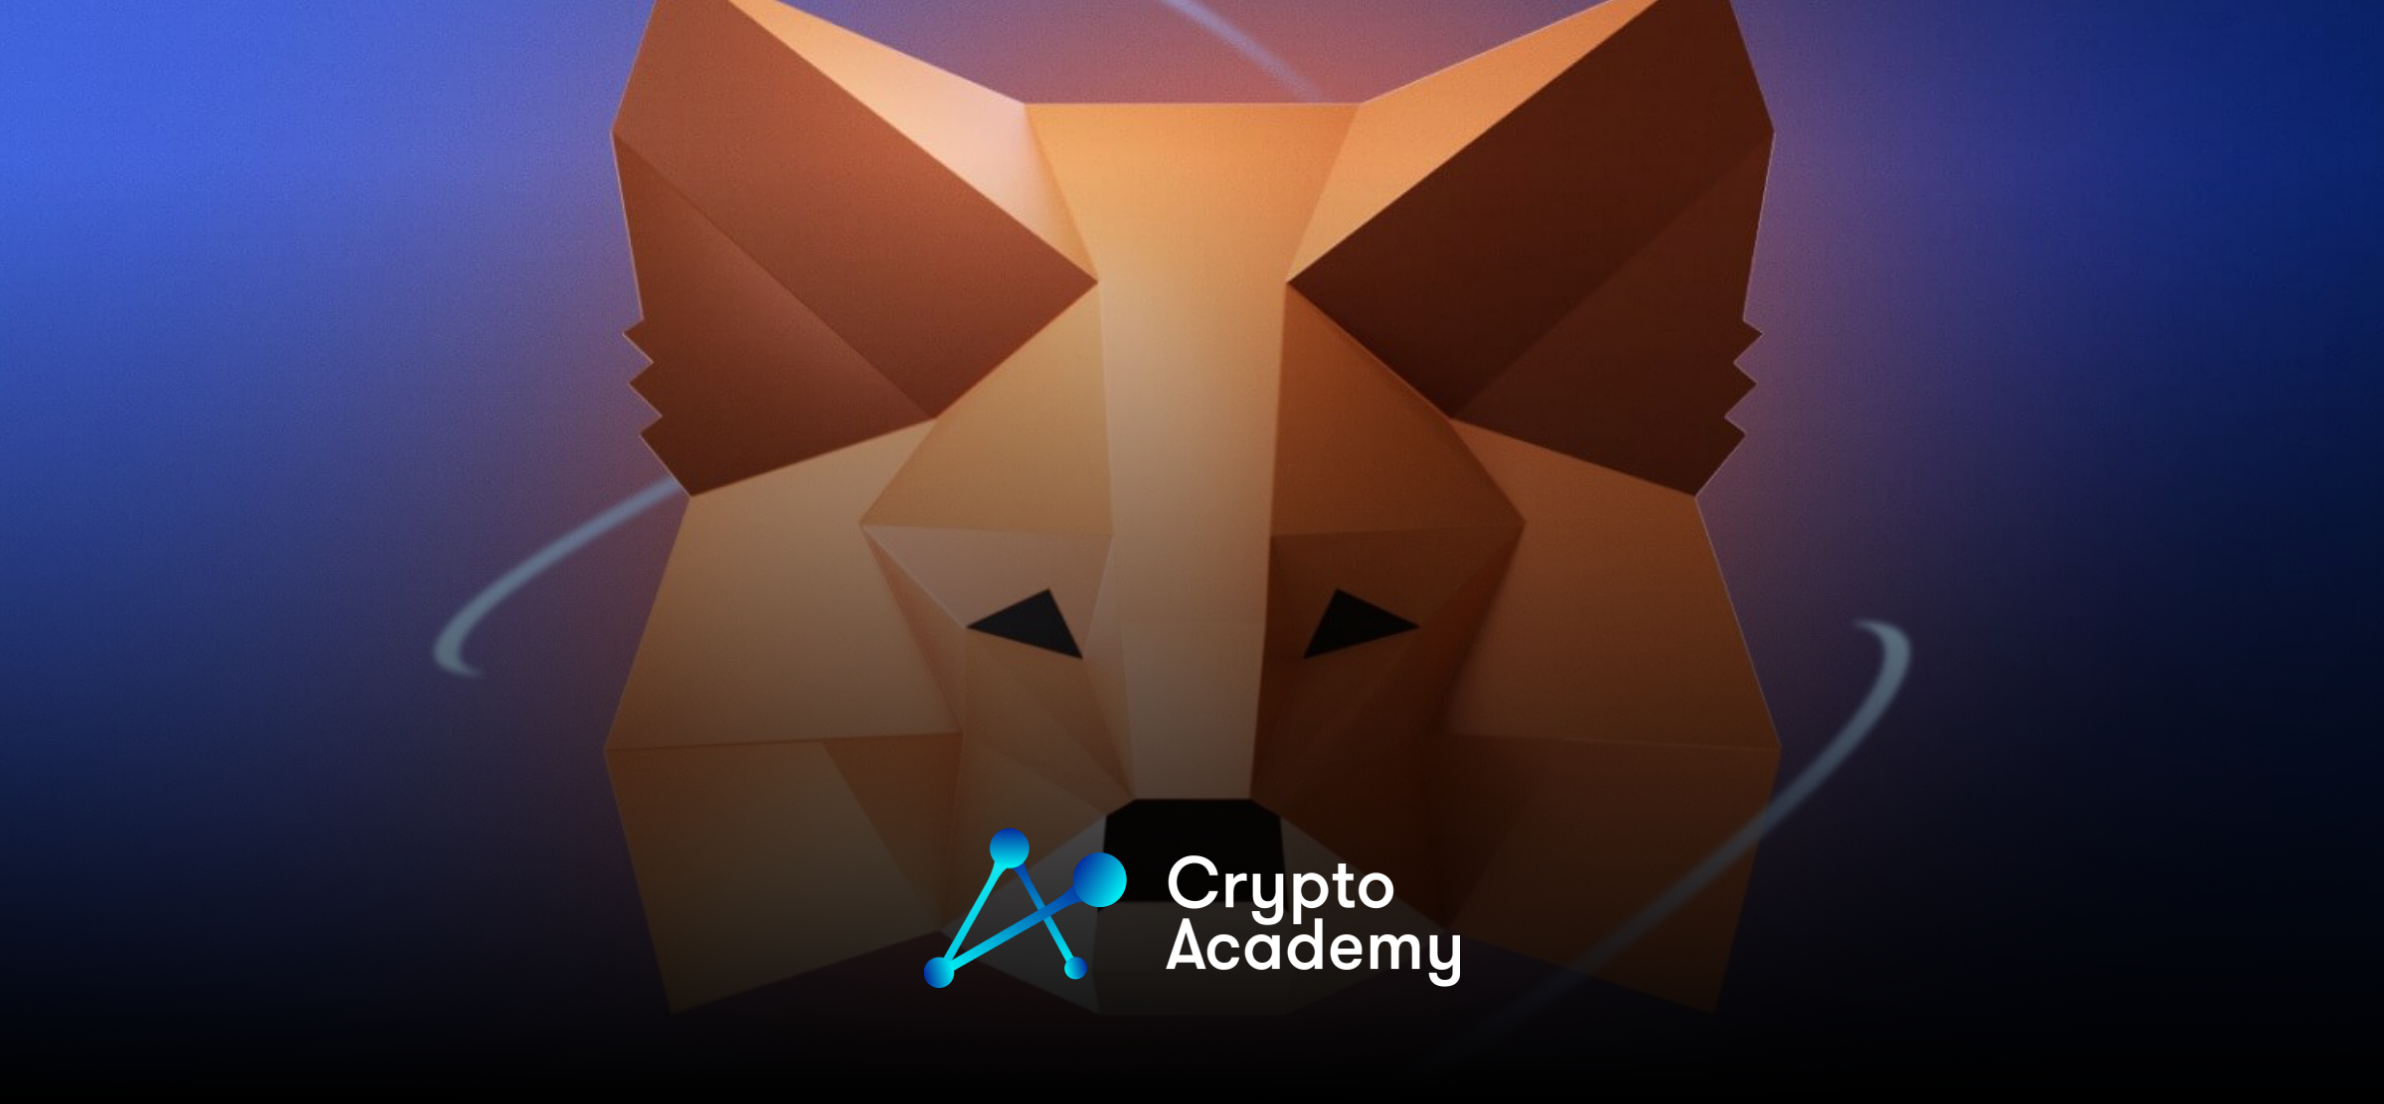 MetaMask Momentarily Removed From Apple’s App Store